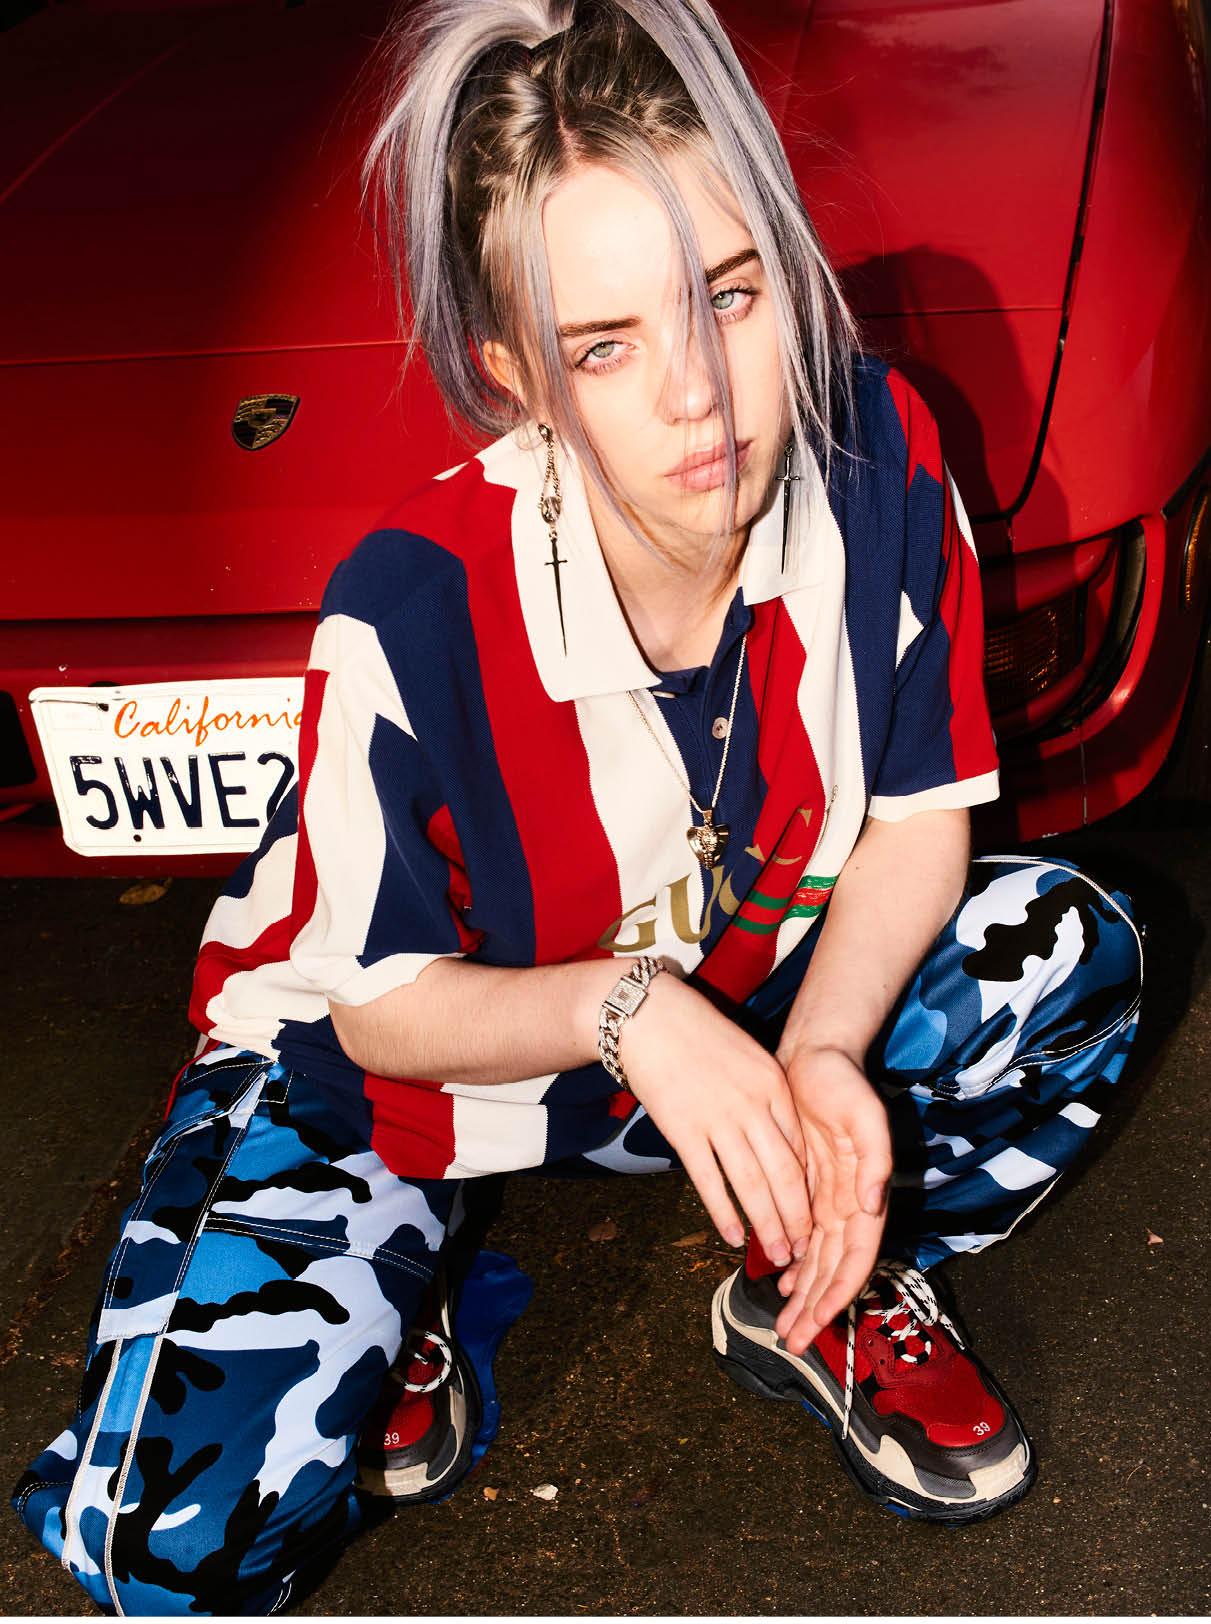 Don't Wanna Be You: Billie Eilish Interviewed. Features